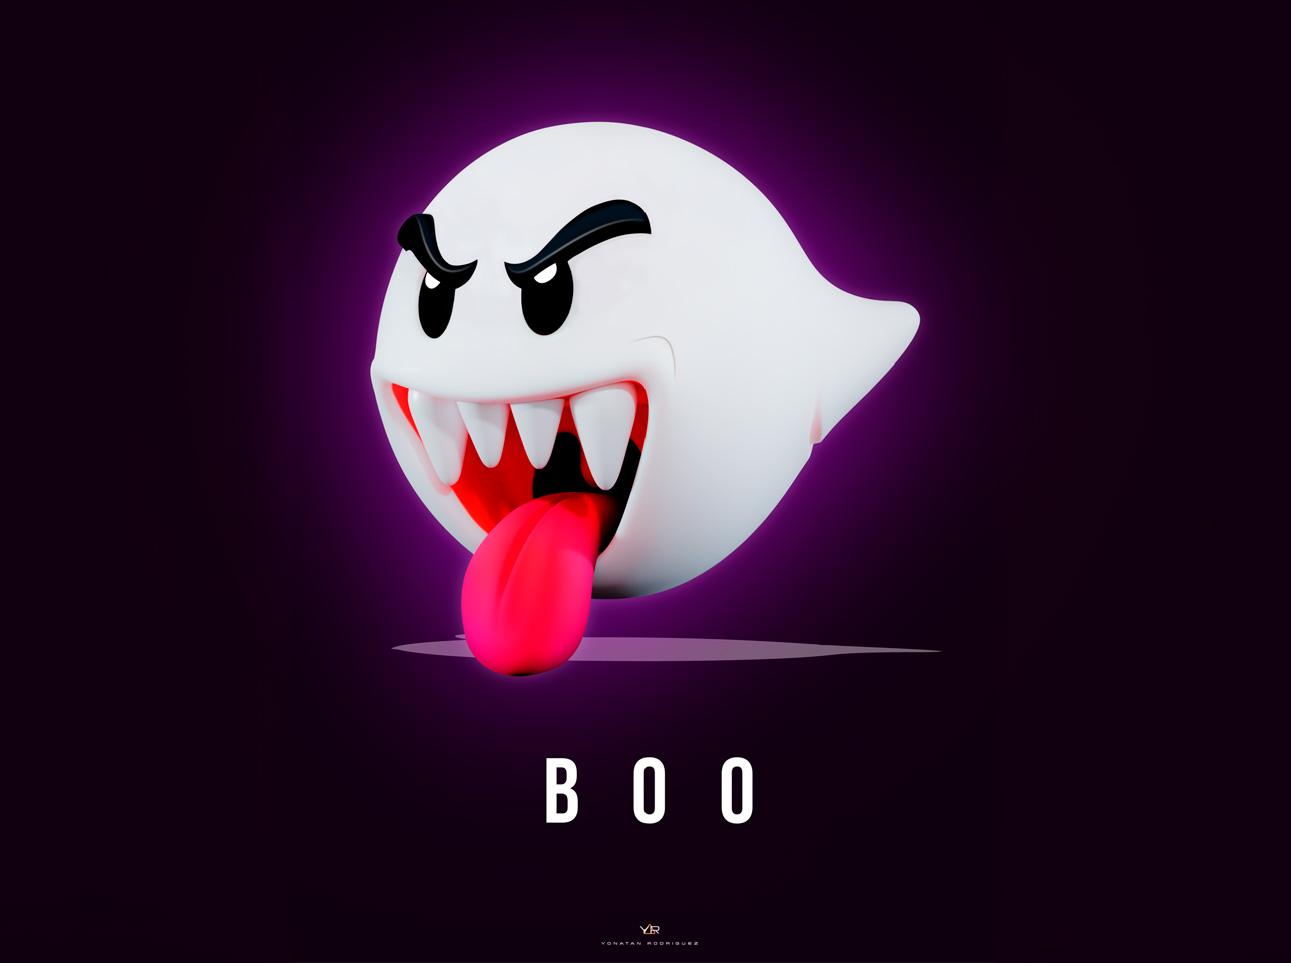 Super Mario Bros "Boo" available for free this Weekend!